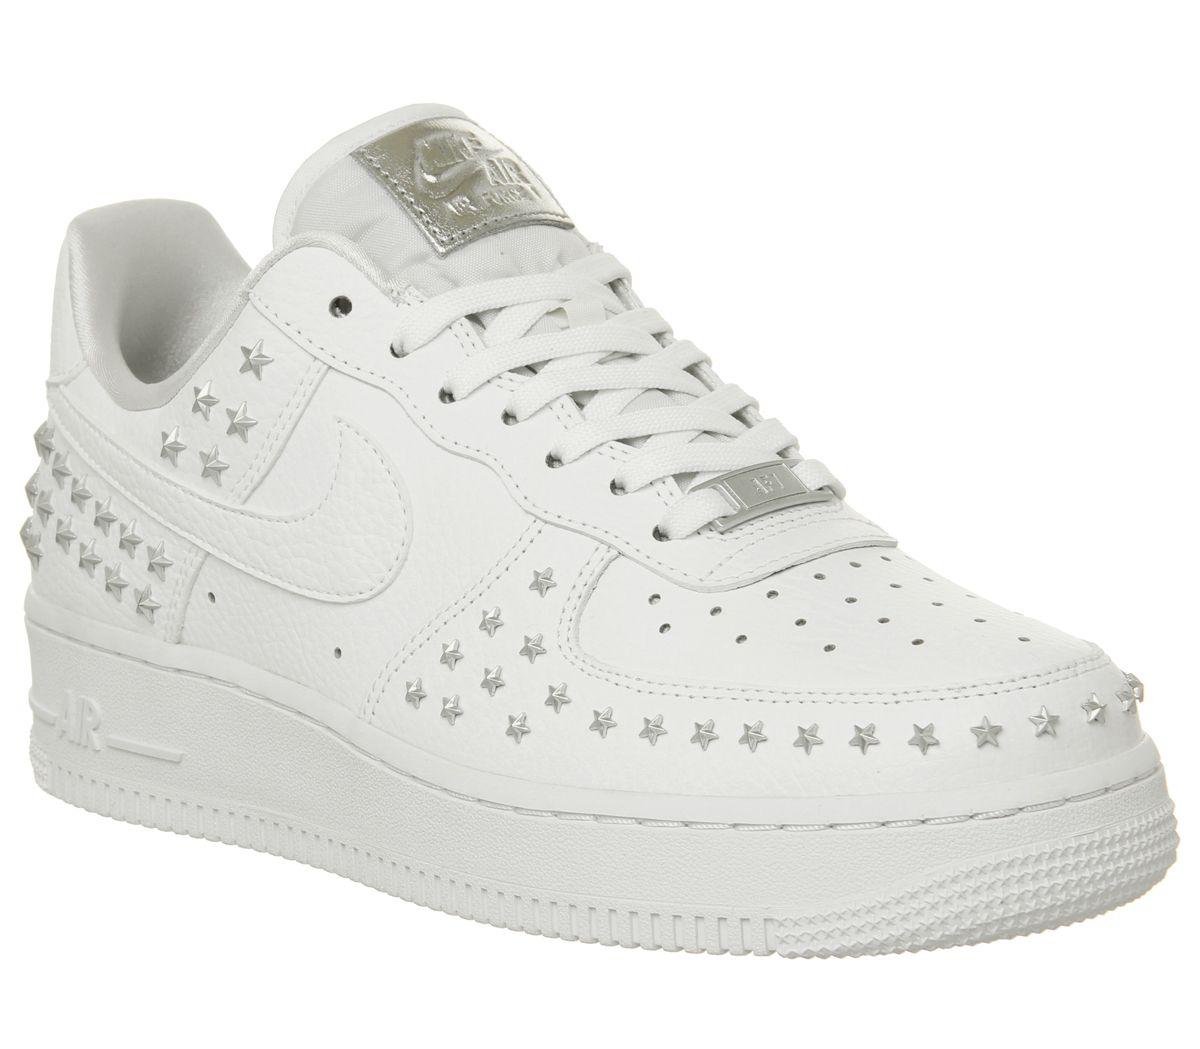 Nike Air Force 1' 07 Xx Studded Shoe in 